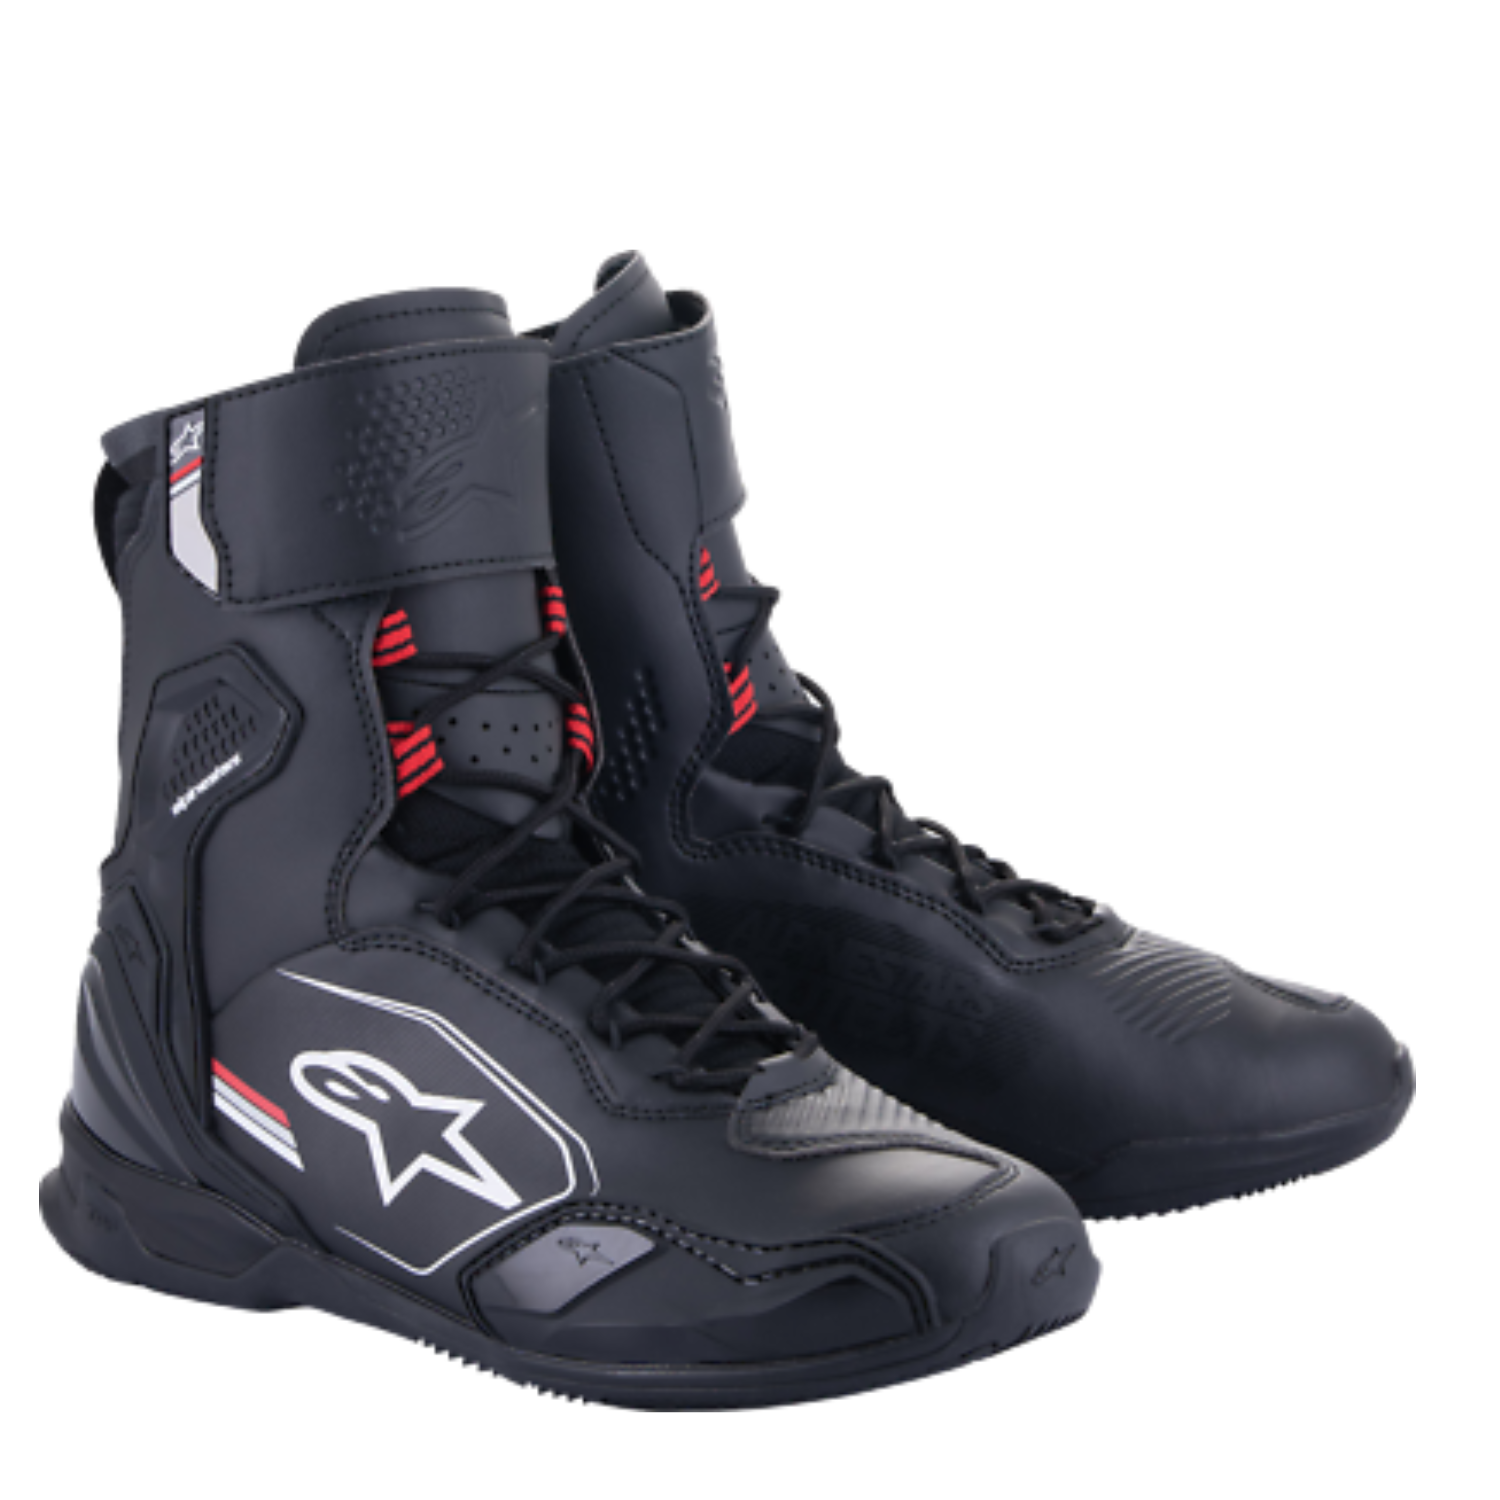 Image of Alpinestars Superfaster Shoes Black Gray Bright Red Taille US 95